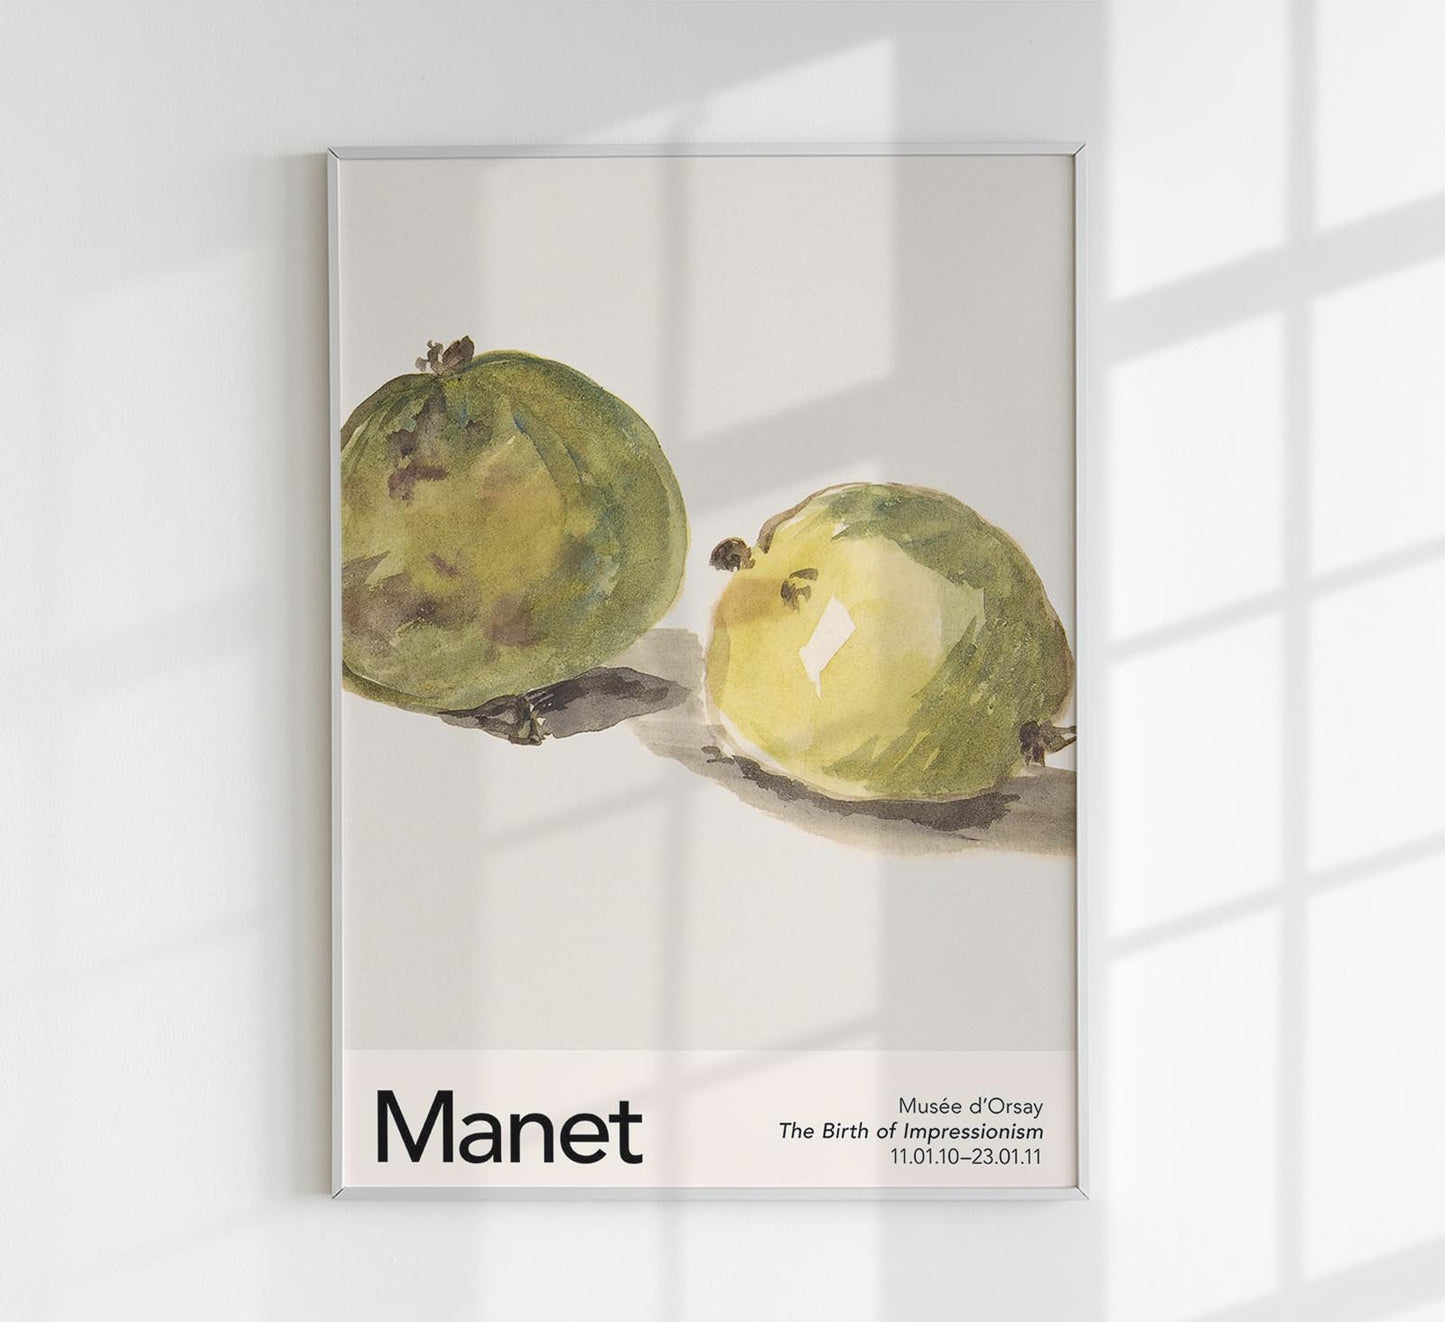 A Letter to Eugéne Maus by Manet Exhibition Poster